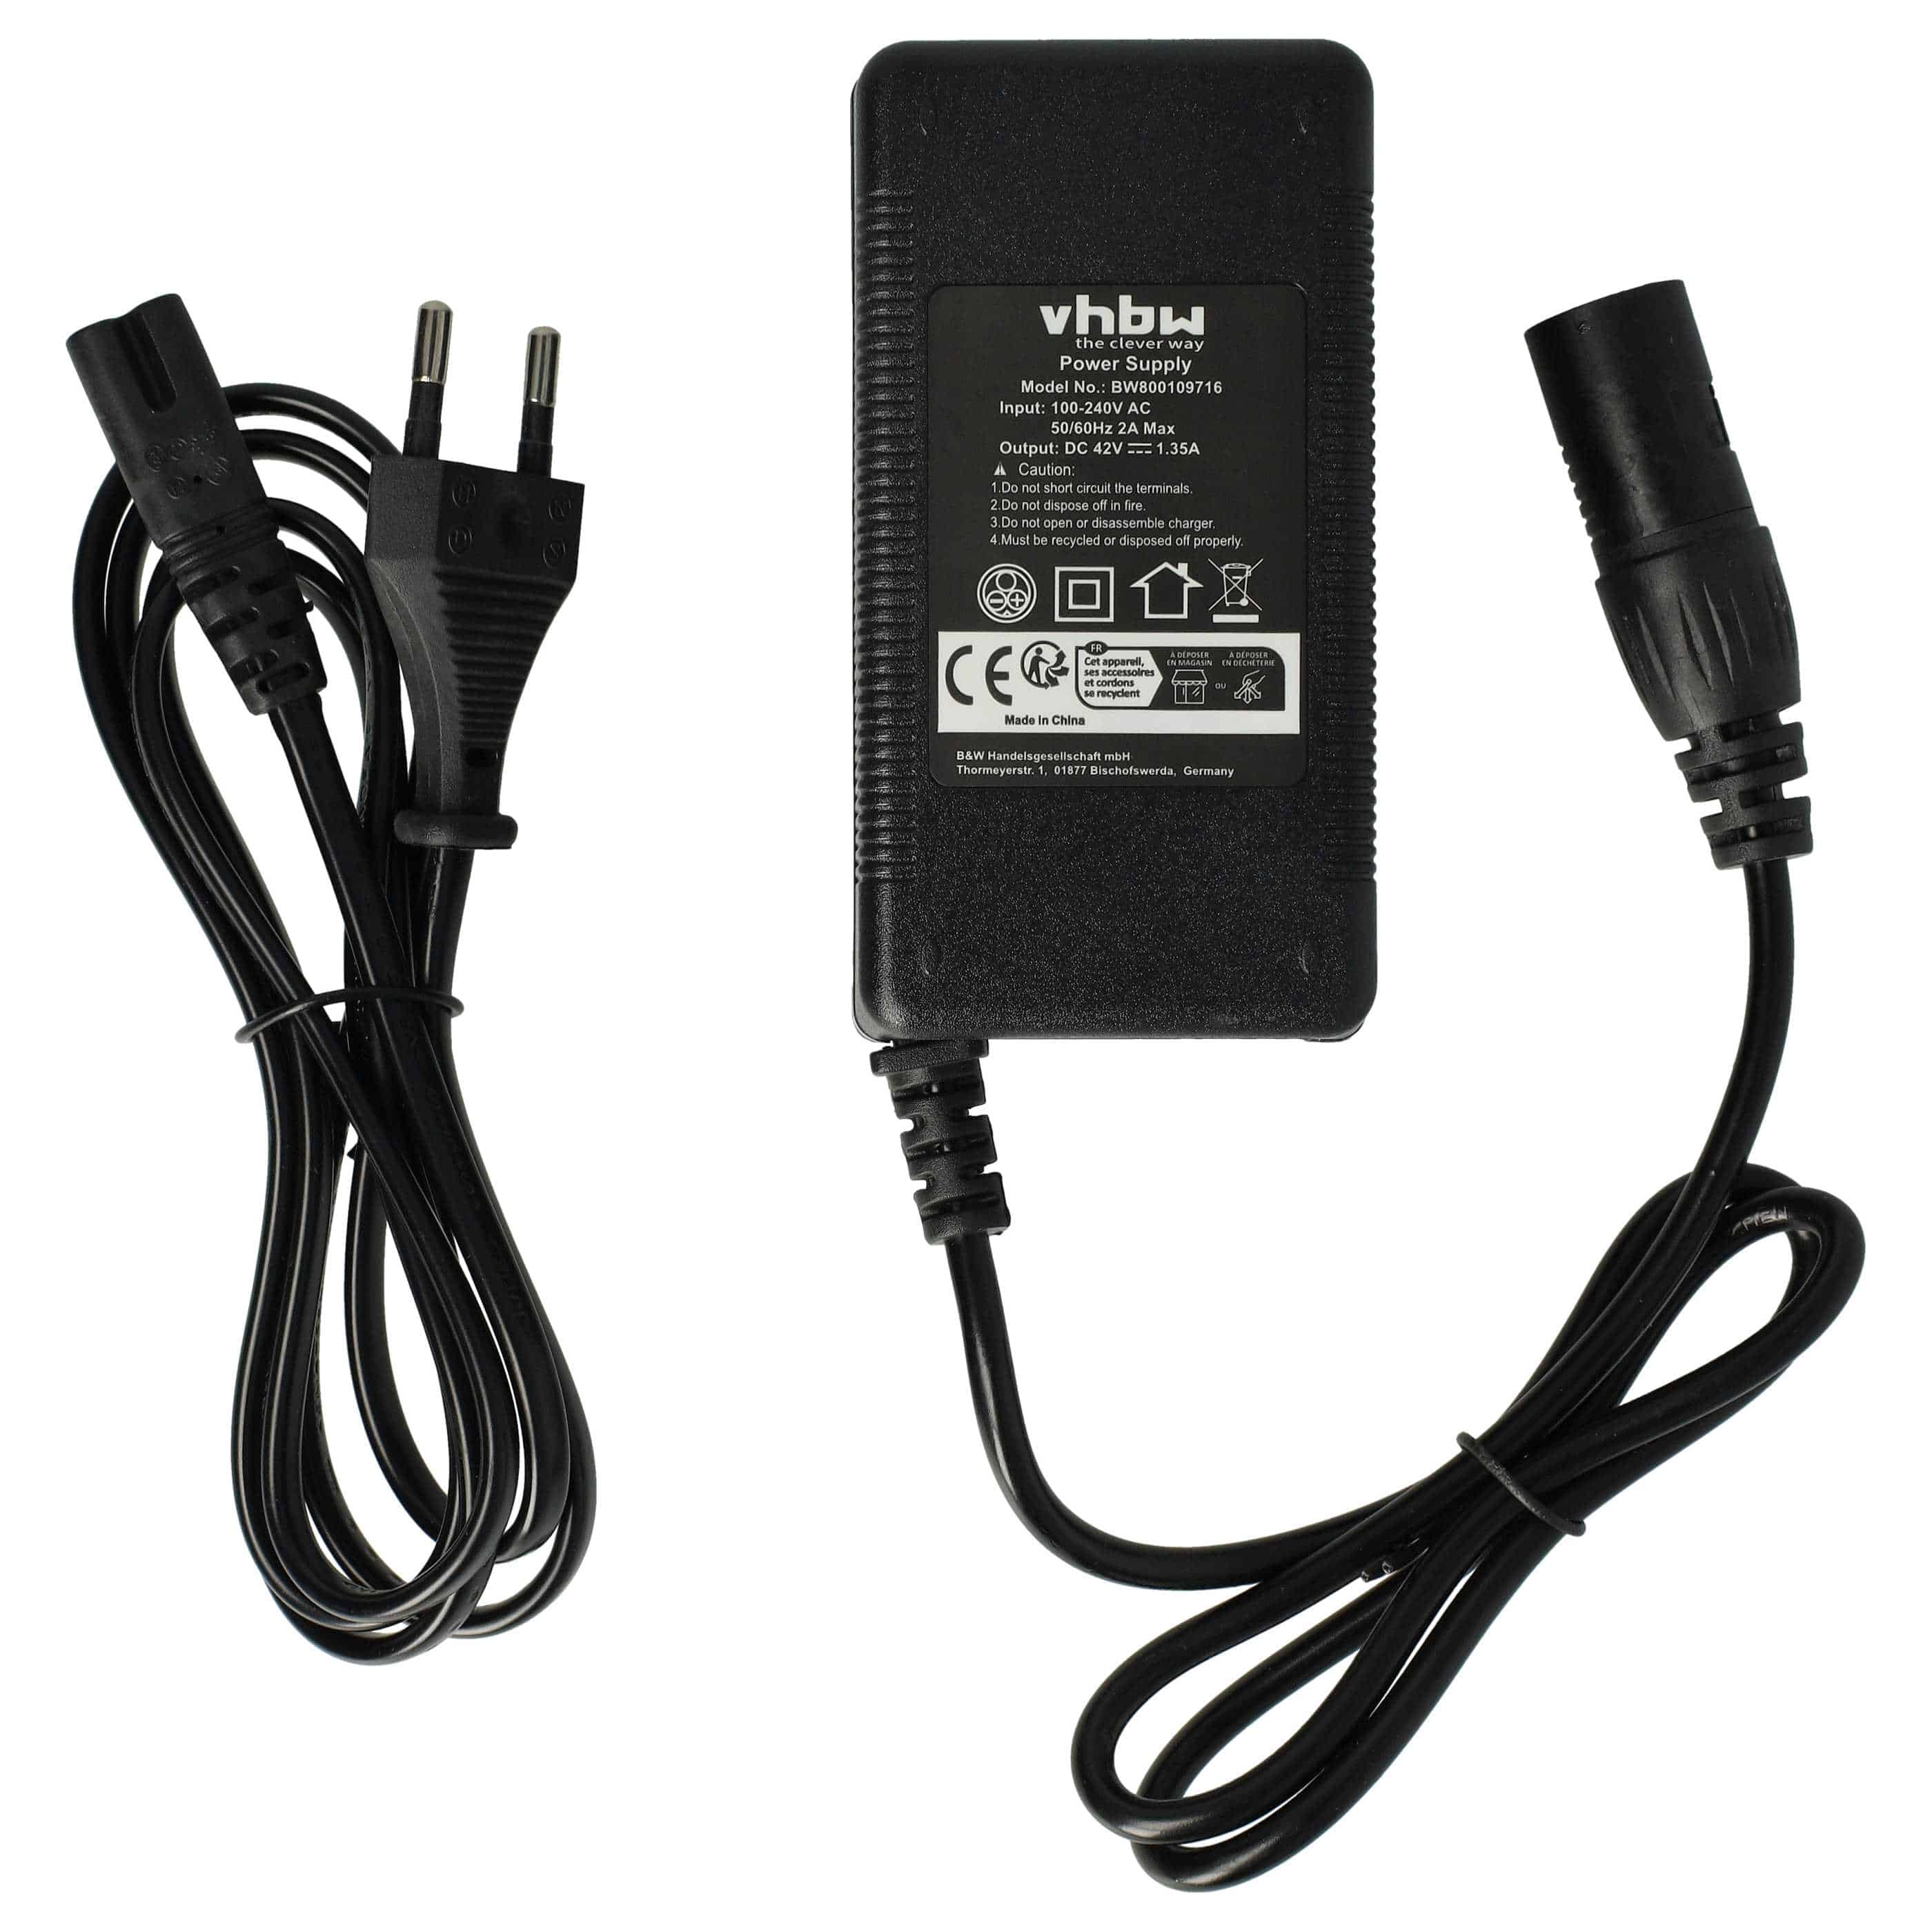 Charger suitable for Prophete Li-Ion E-Bike Battery etc. - For 36 V Batteries, With 3 Pin Connector, With XLR 